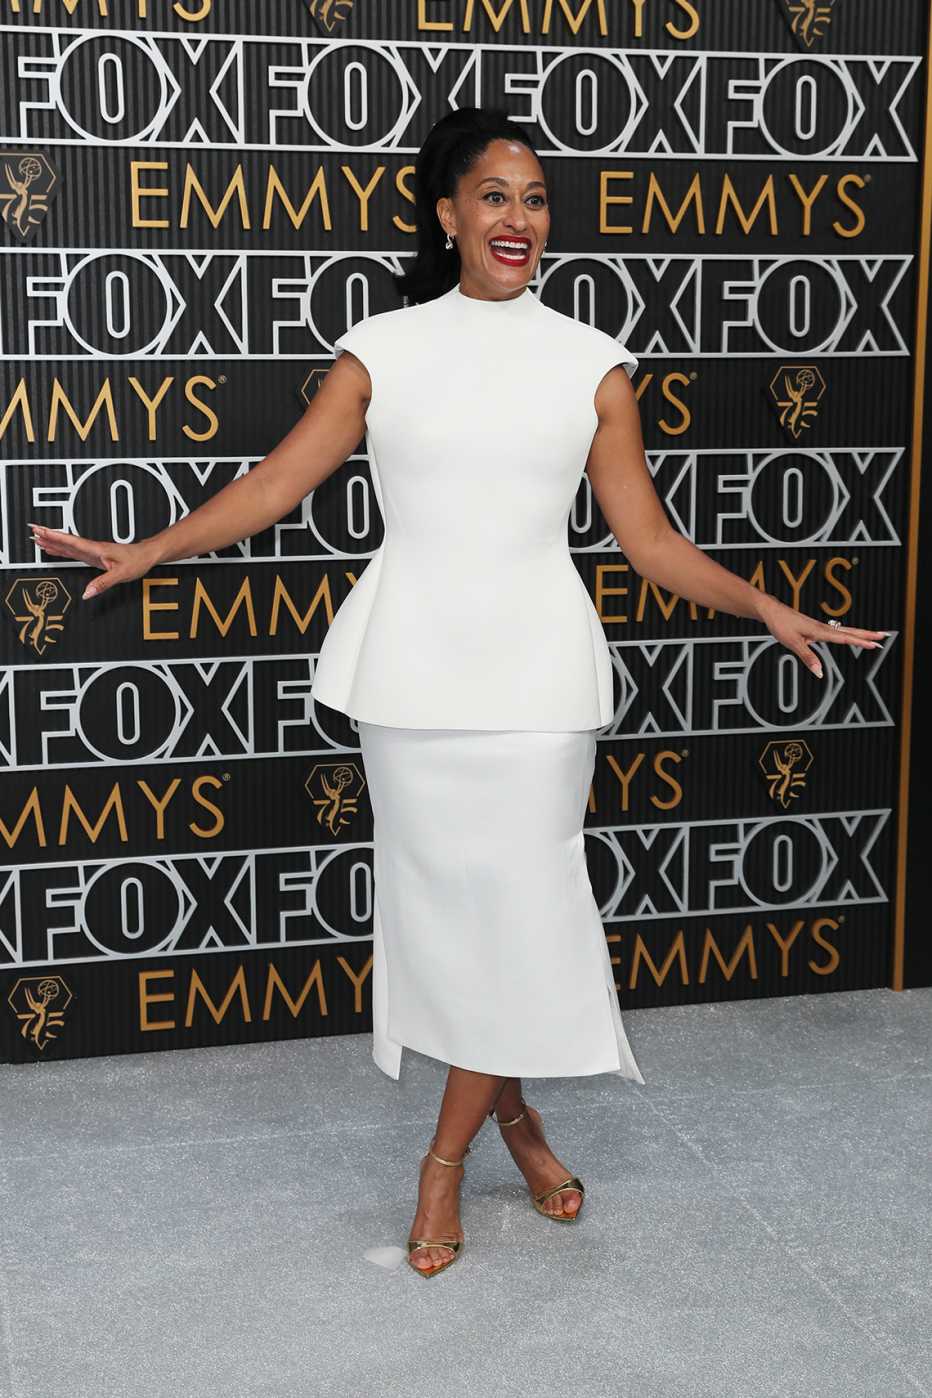 Tracee Ellis Ross on the red carpet at the 75th Emmy Awards